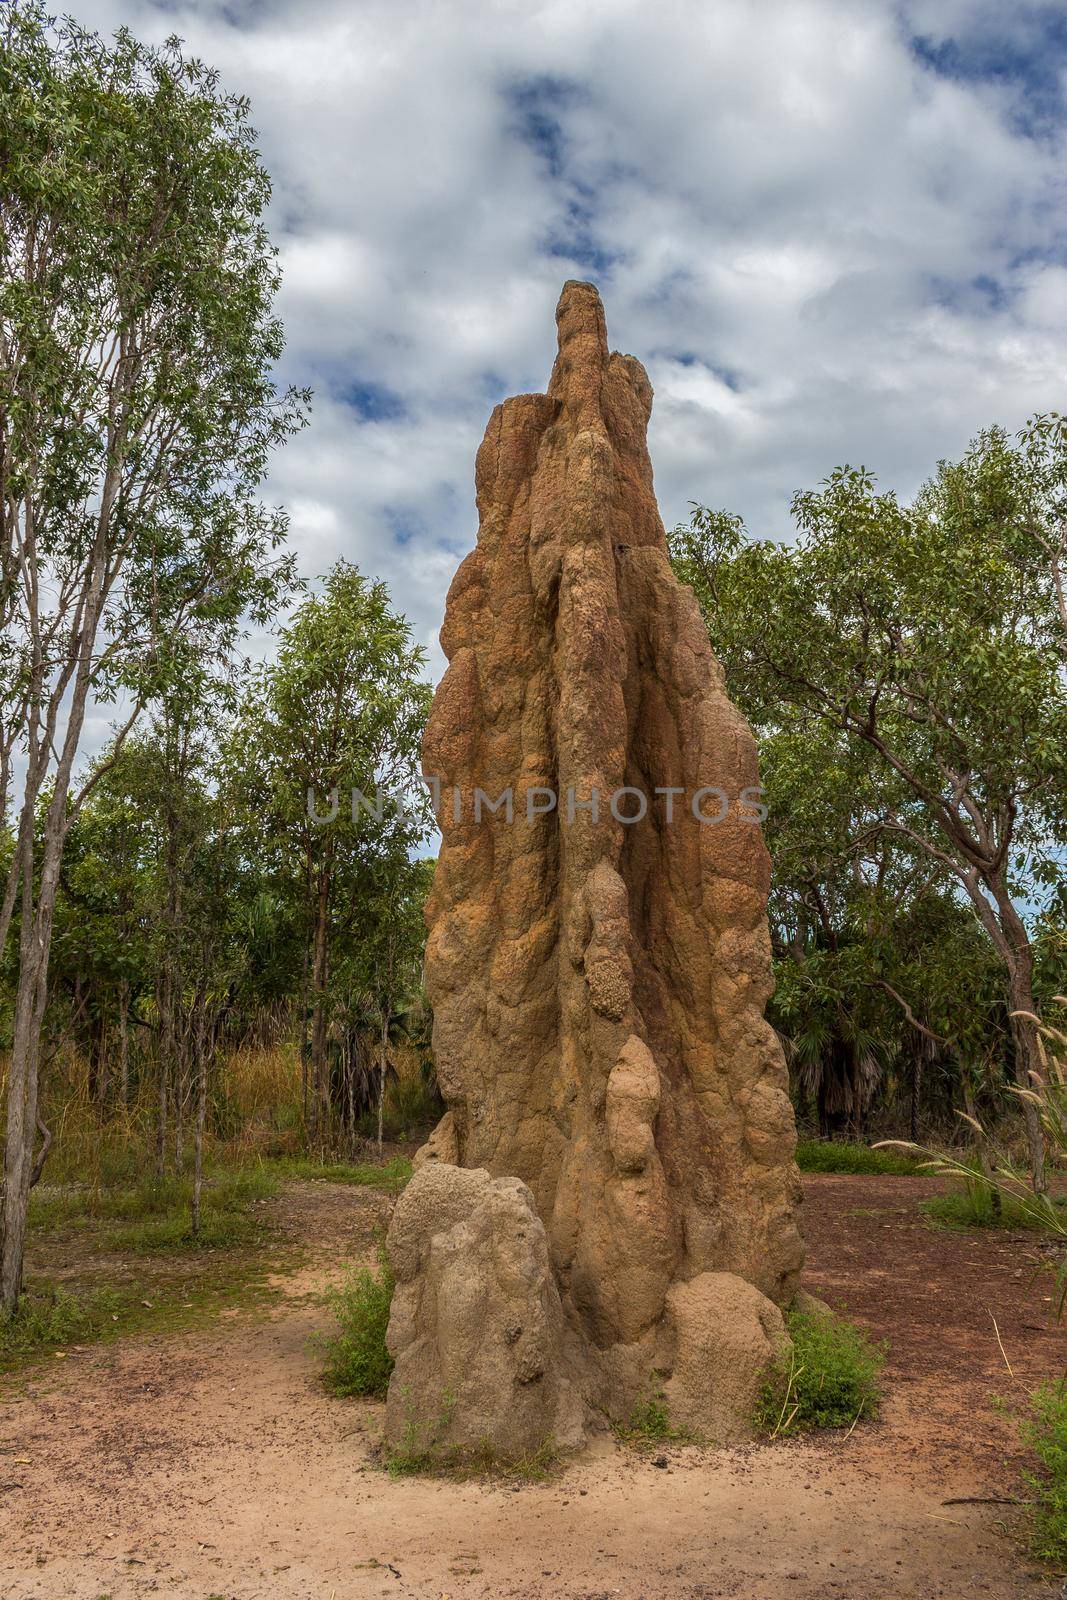 Termite Mound in Litchfield National Park, Northern Territory, Australia by bettercallcurry